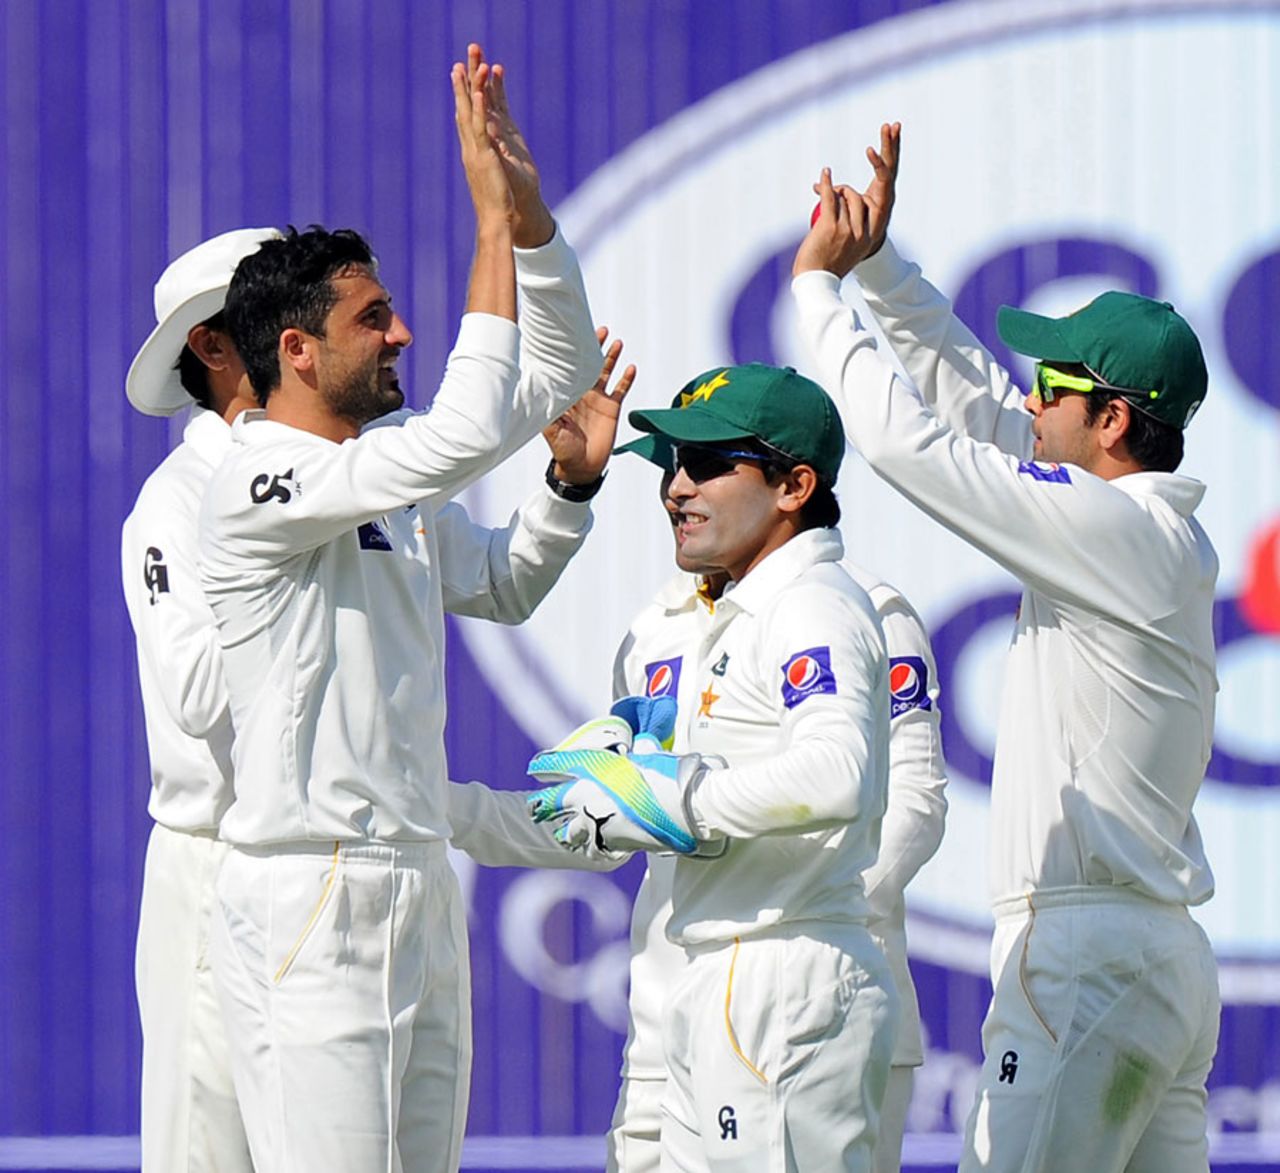 Junaid Khan is congratulated after picking up a wicket, Pakistan v Sri Lanka, 1st Test, Abu Dhabi, 1st day, December 31, 2013